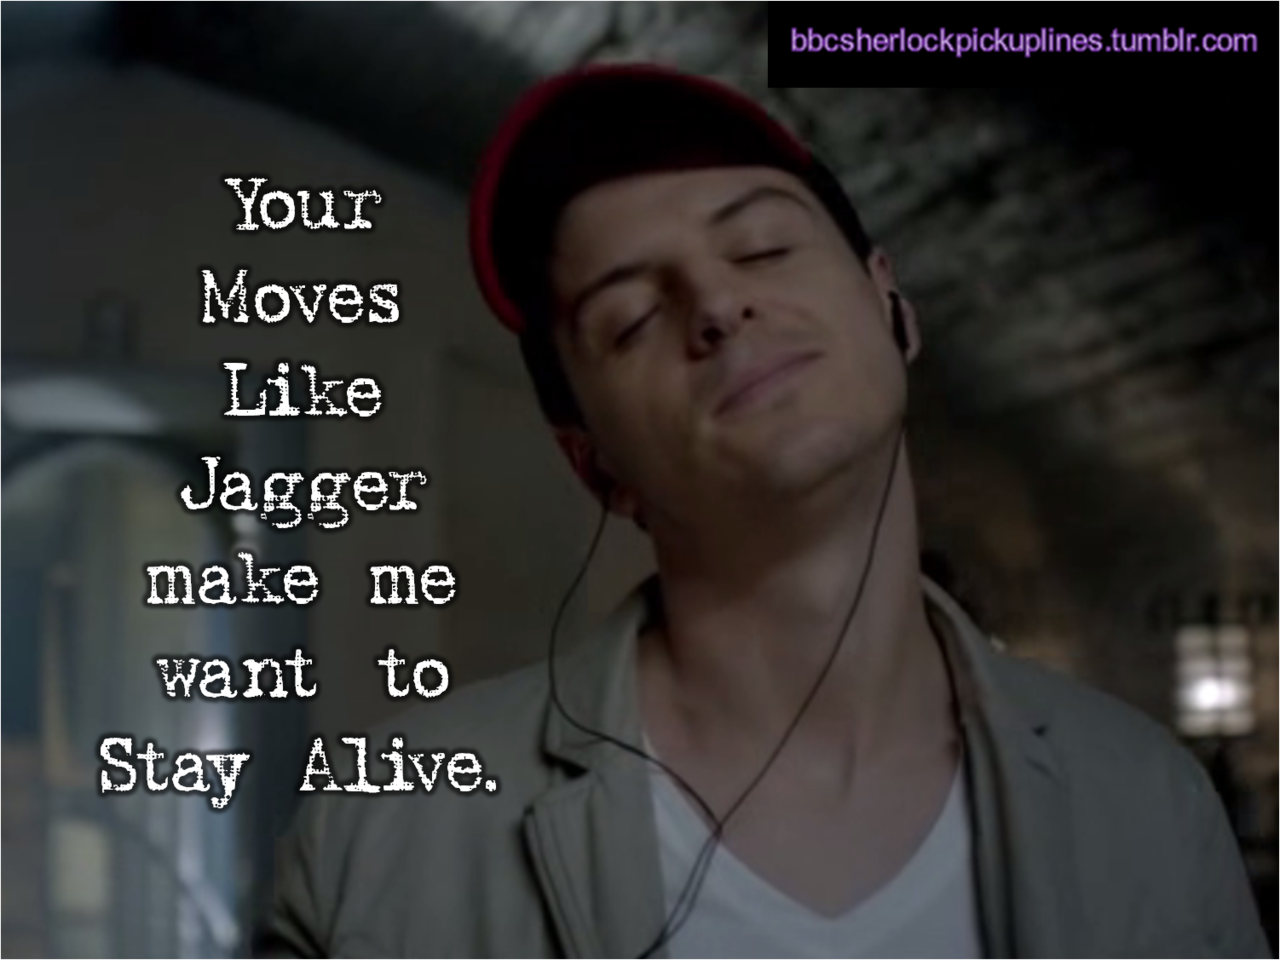 &ldquo;Your Moves Like Jagger make me want to Stay Alive.&rdquo;